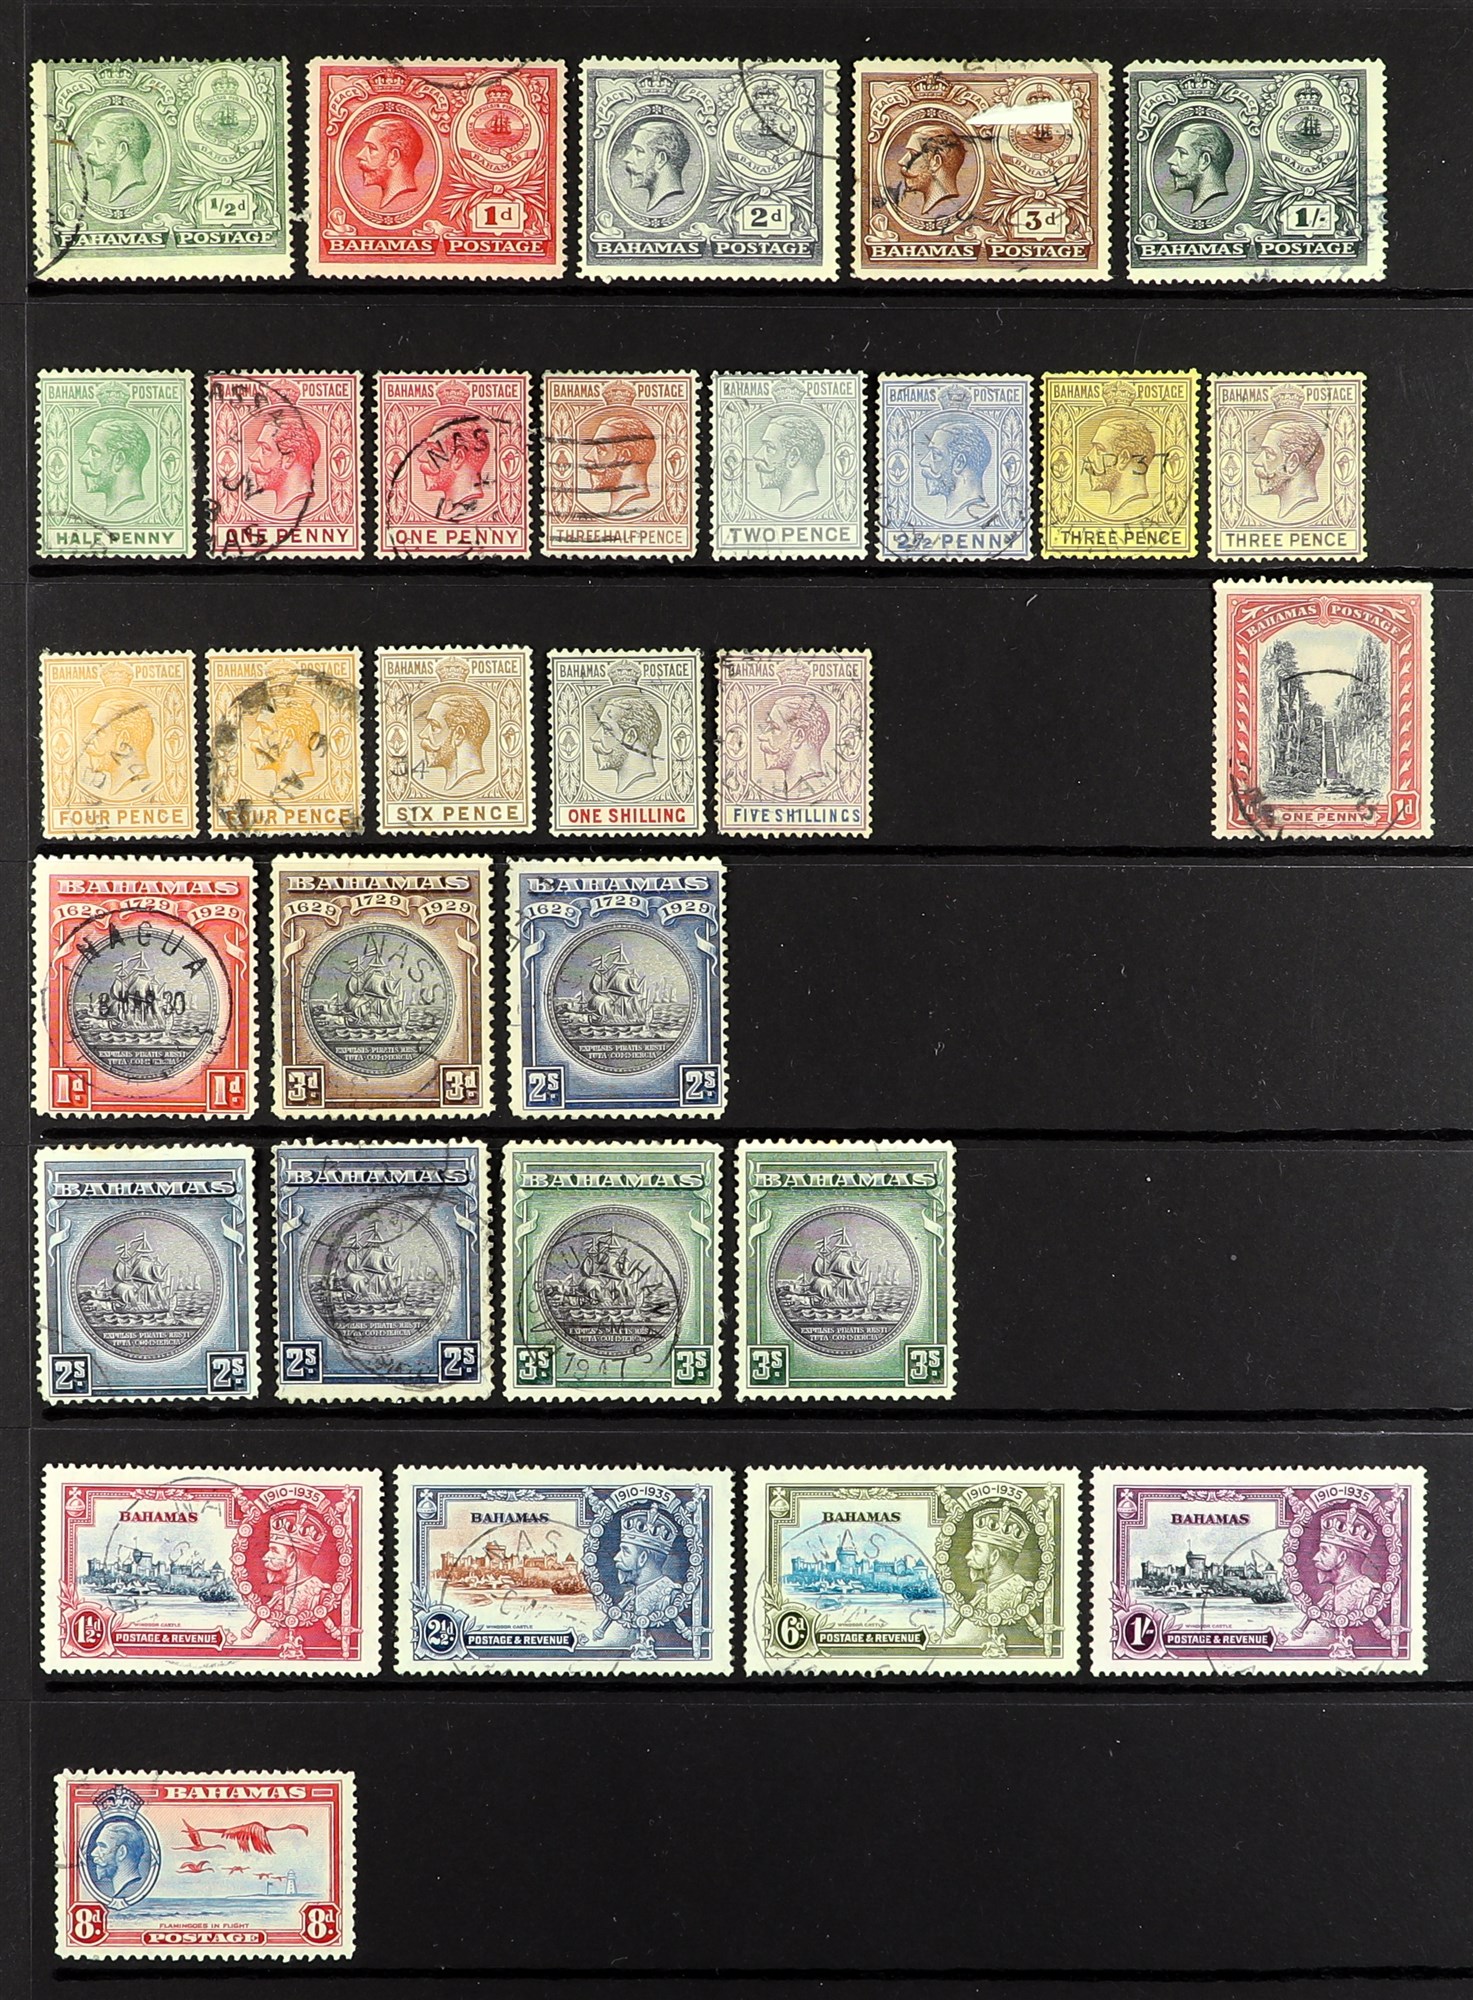 BAHAMAS 1884 - 1935 USED COLLECTION of 70+ stamps on protective pages, note 1901-03 2s & 3s - Image 2 of 2